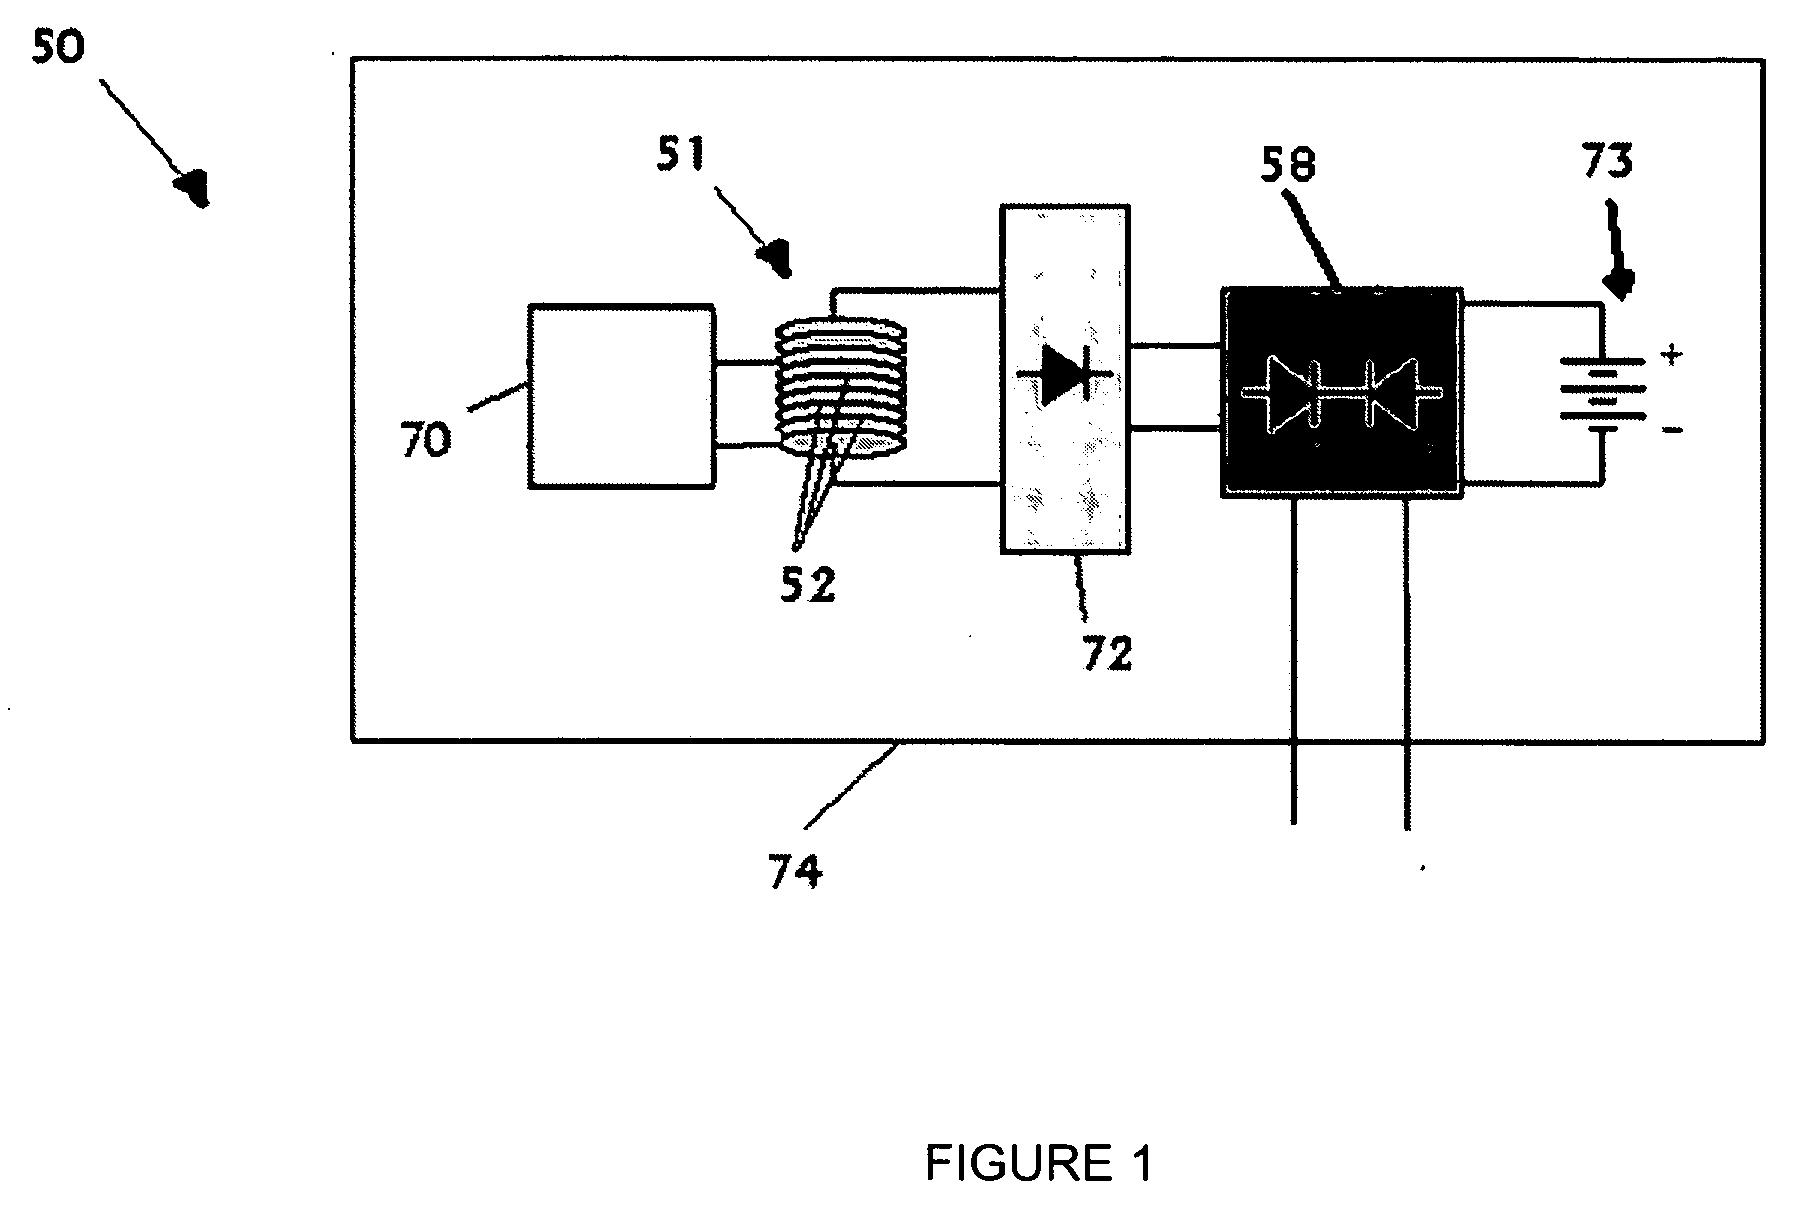 Methods and apparatus for in situ generation of power for devices deployed in a tubular